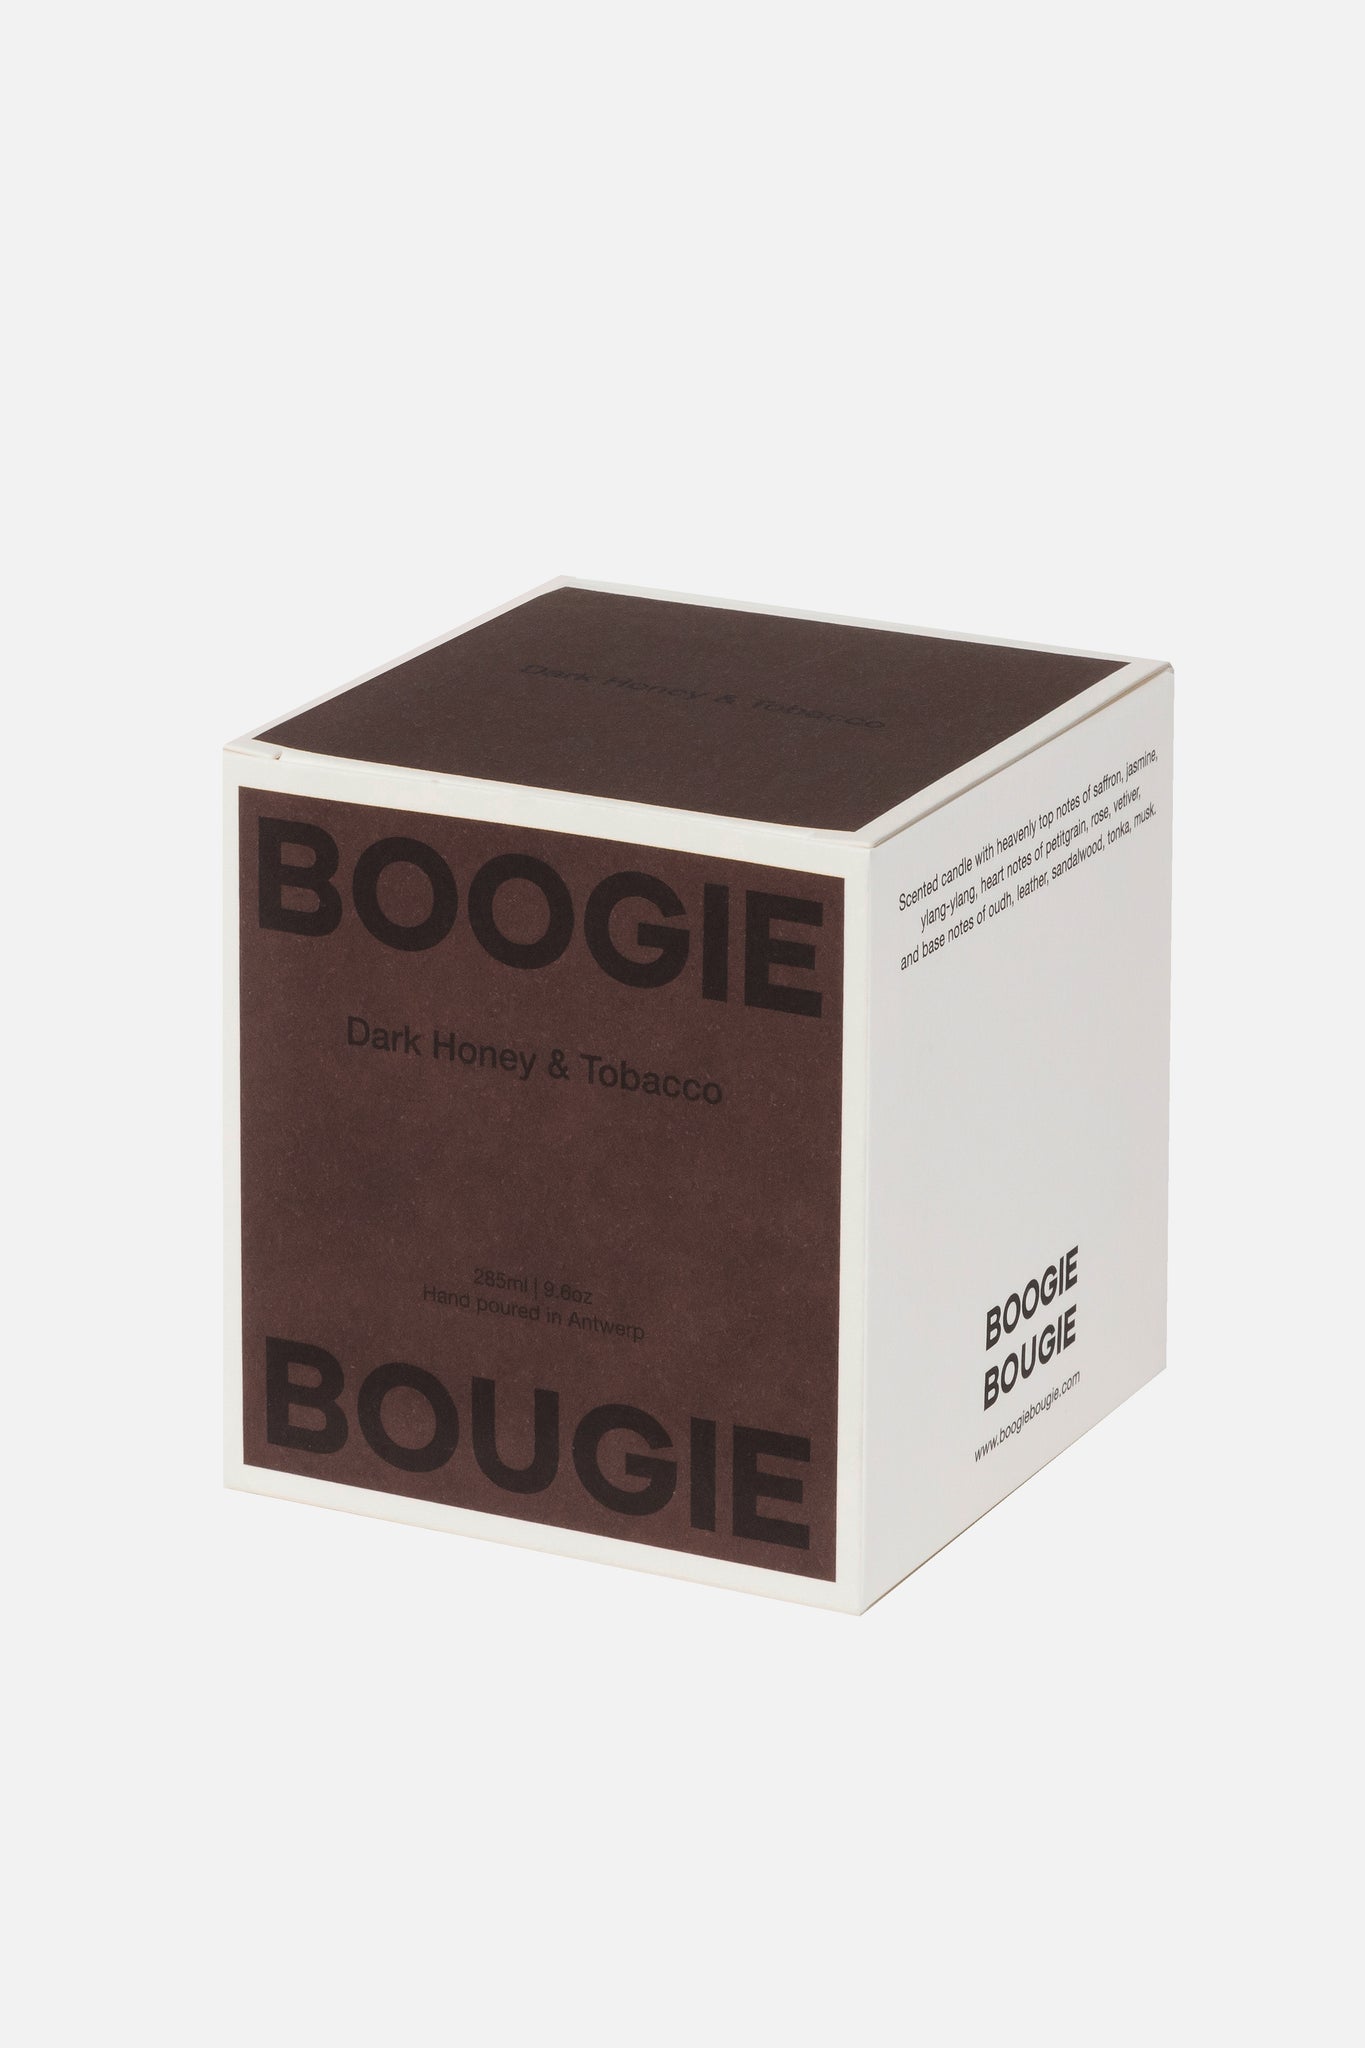 Scented Candle Dark Honey & Tobacco-Boogie Bougie-KIOSK48TH